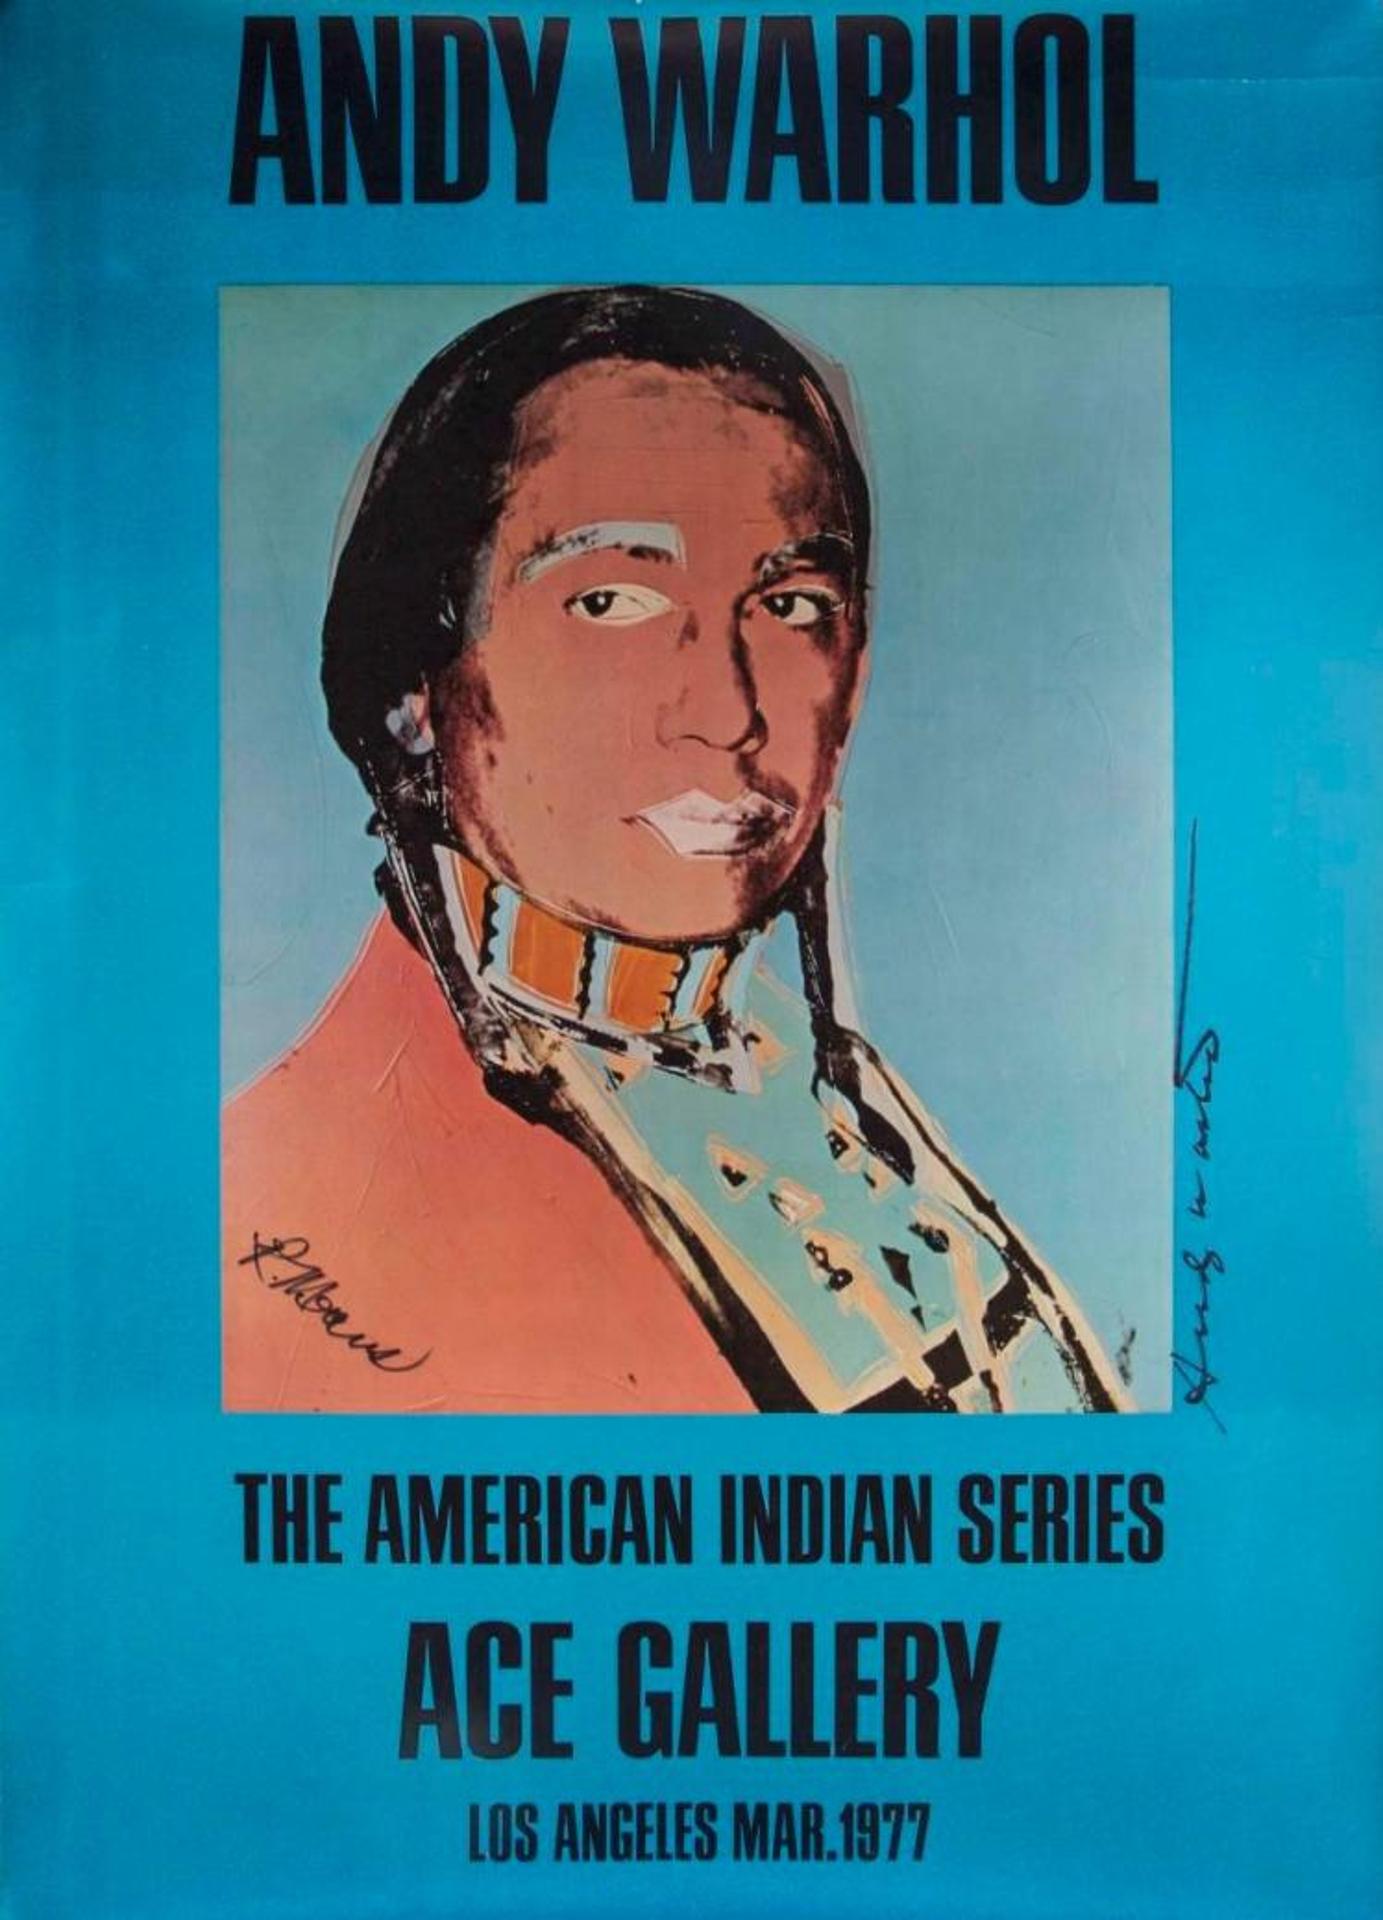 Andy Warhol (1928-1987) - The American Indian Series